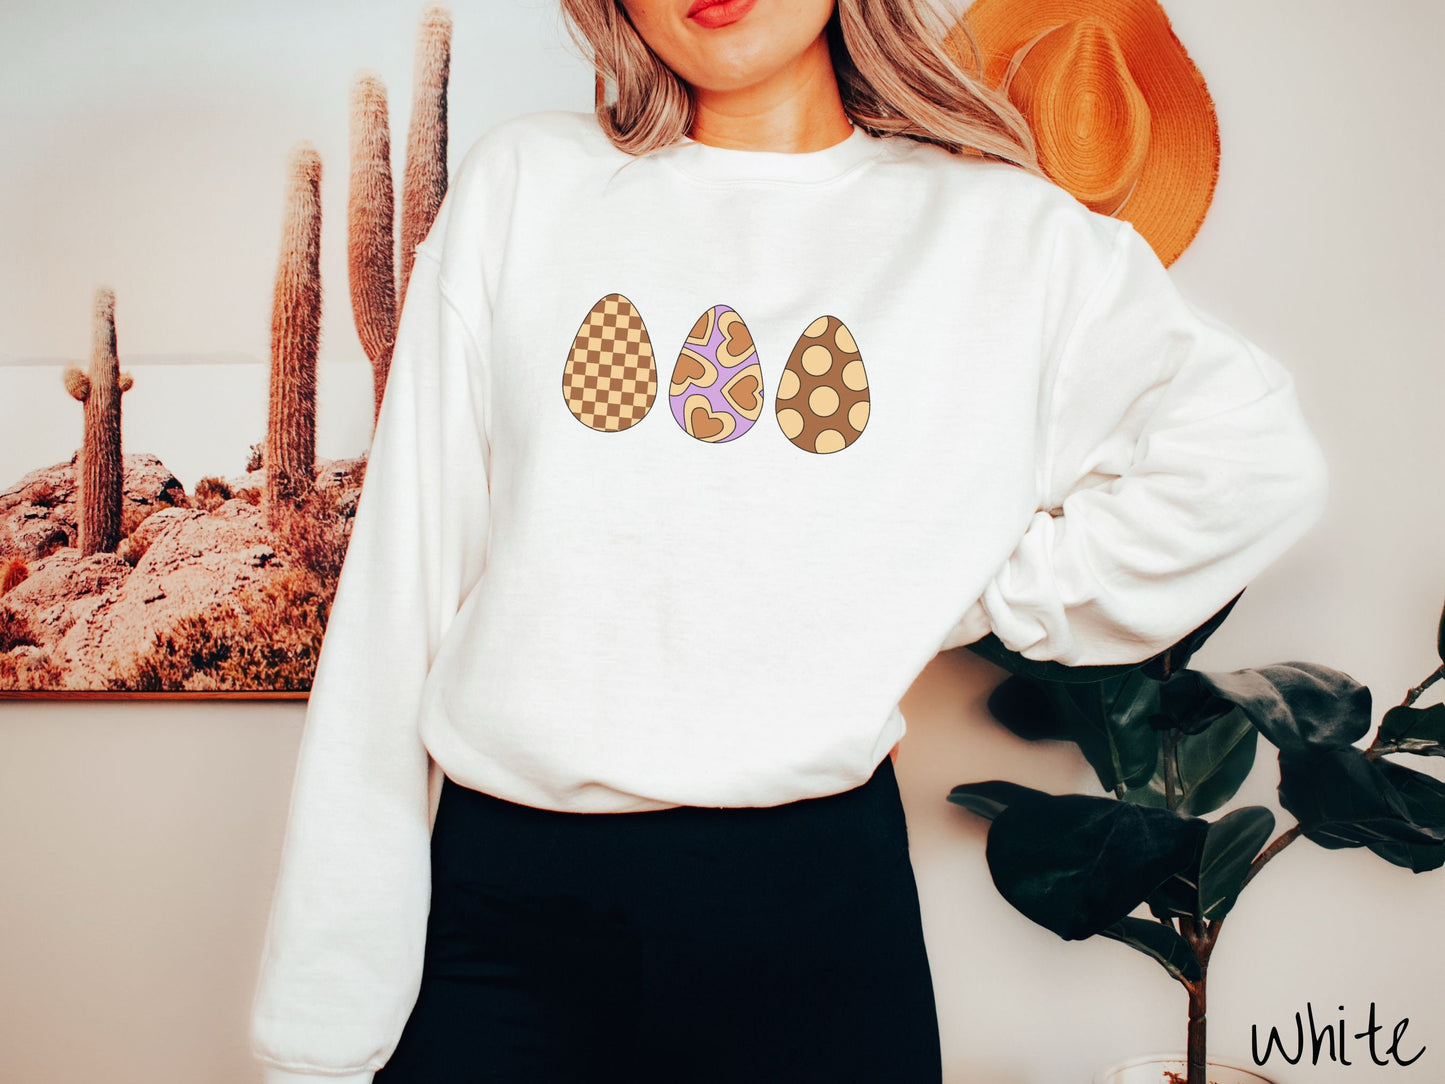 A woman wearing a cute, vintage white colored sweatshirt with three Easter eggs. The left has a light yellow and brown checkerboard pattern, the middle is purple with light yellow brown hearts, and the right is brown with light yellow circles.